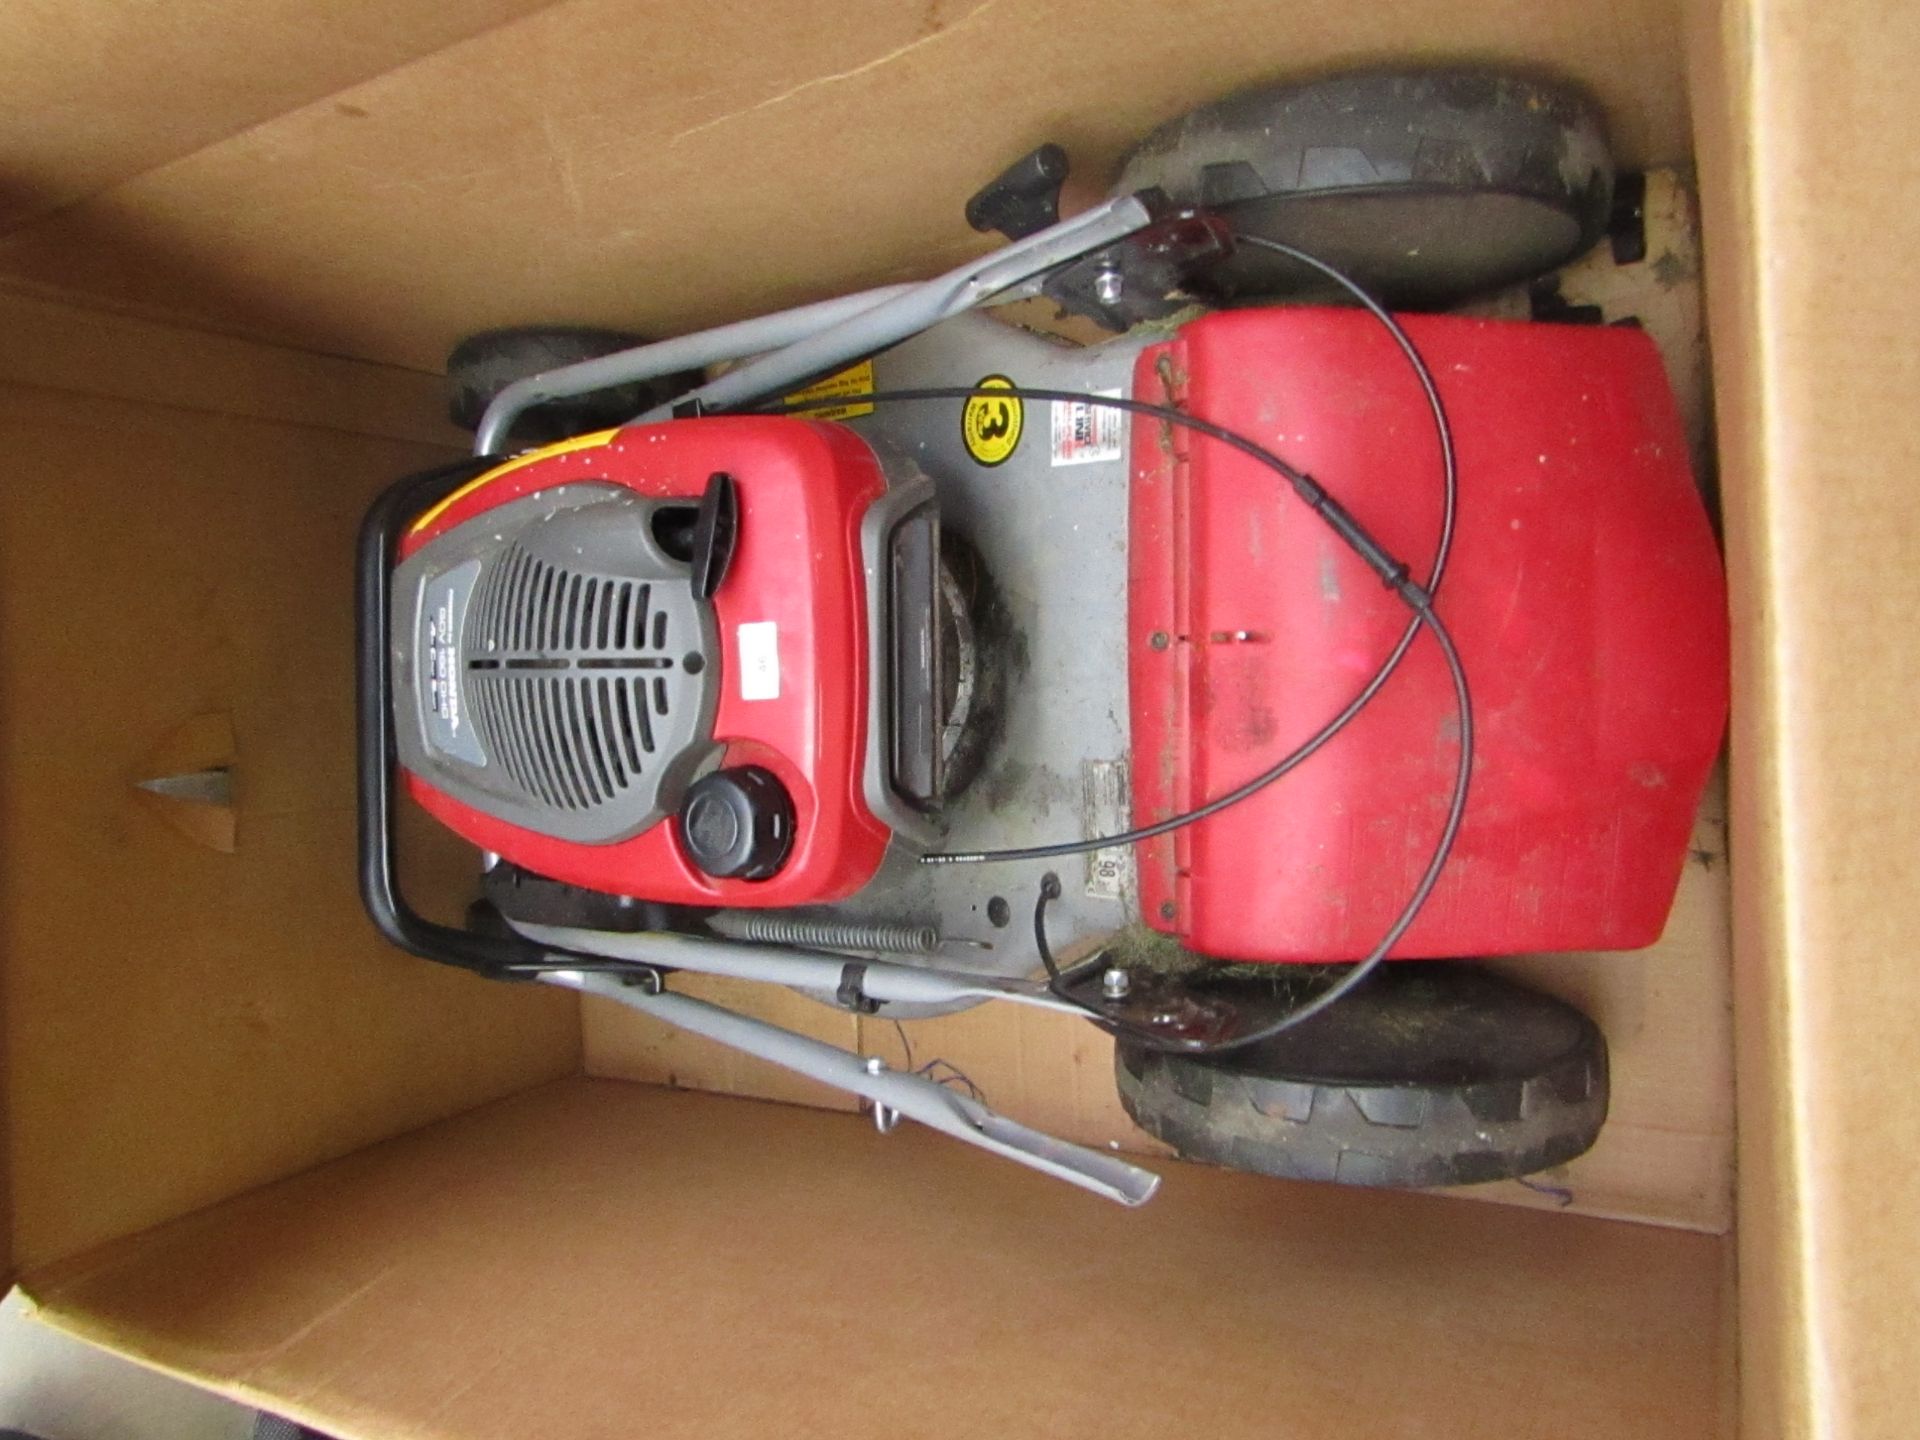 Mountfield SP53H Petrol lawn mower, no grass box, unchecked as no petrol, RRP £368